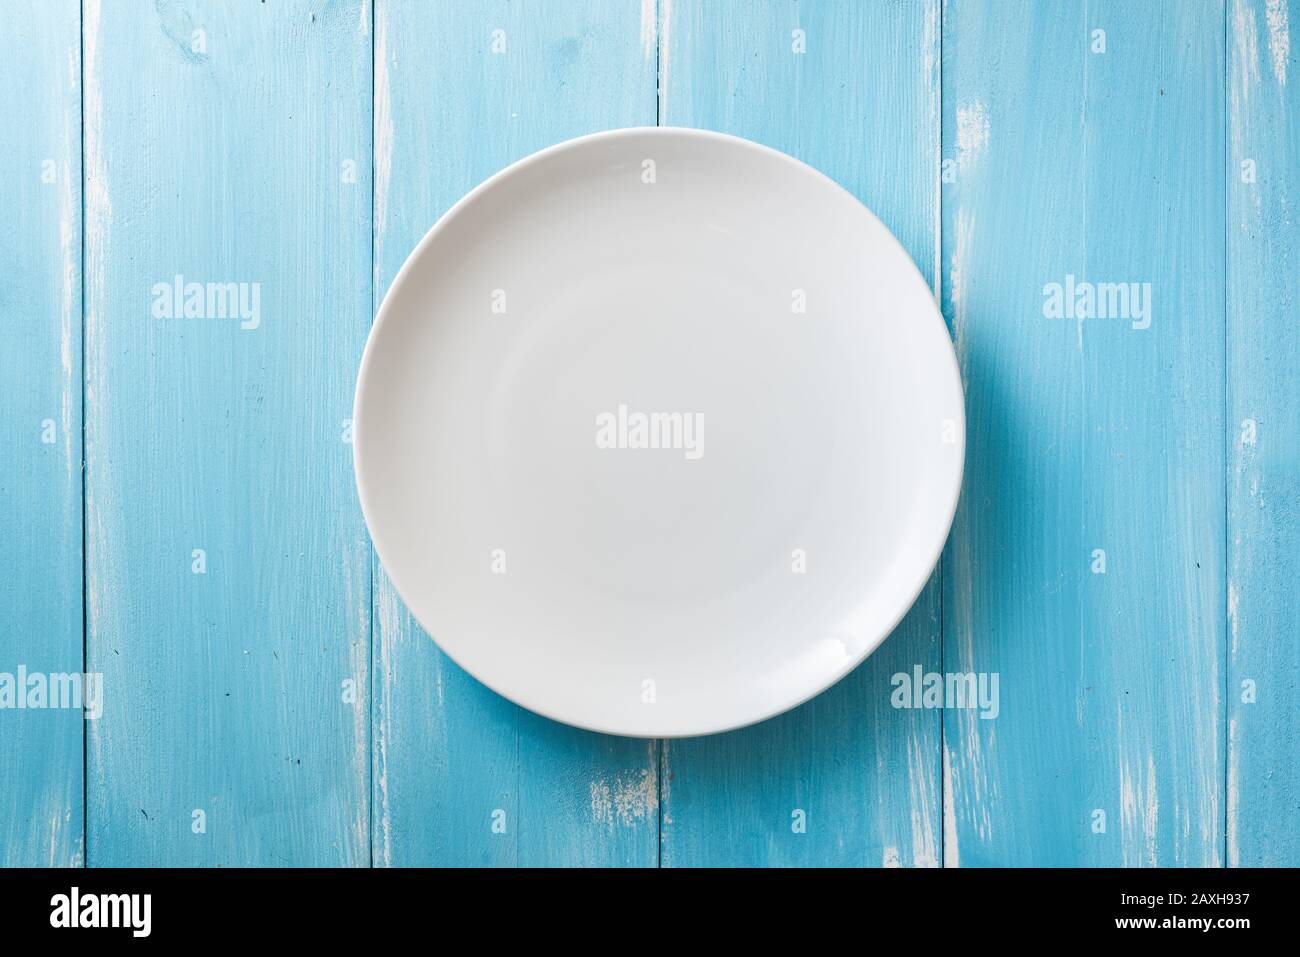 White Round Plate on blue wooden table background Stock Photo